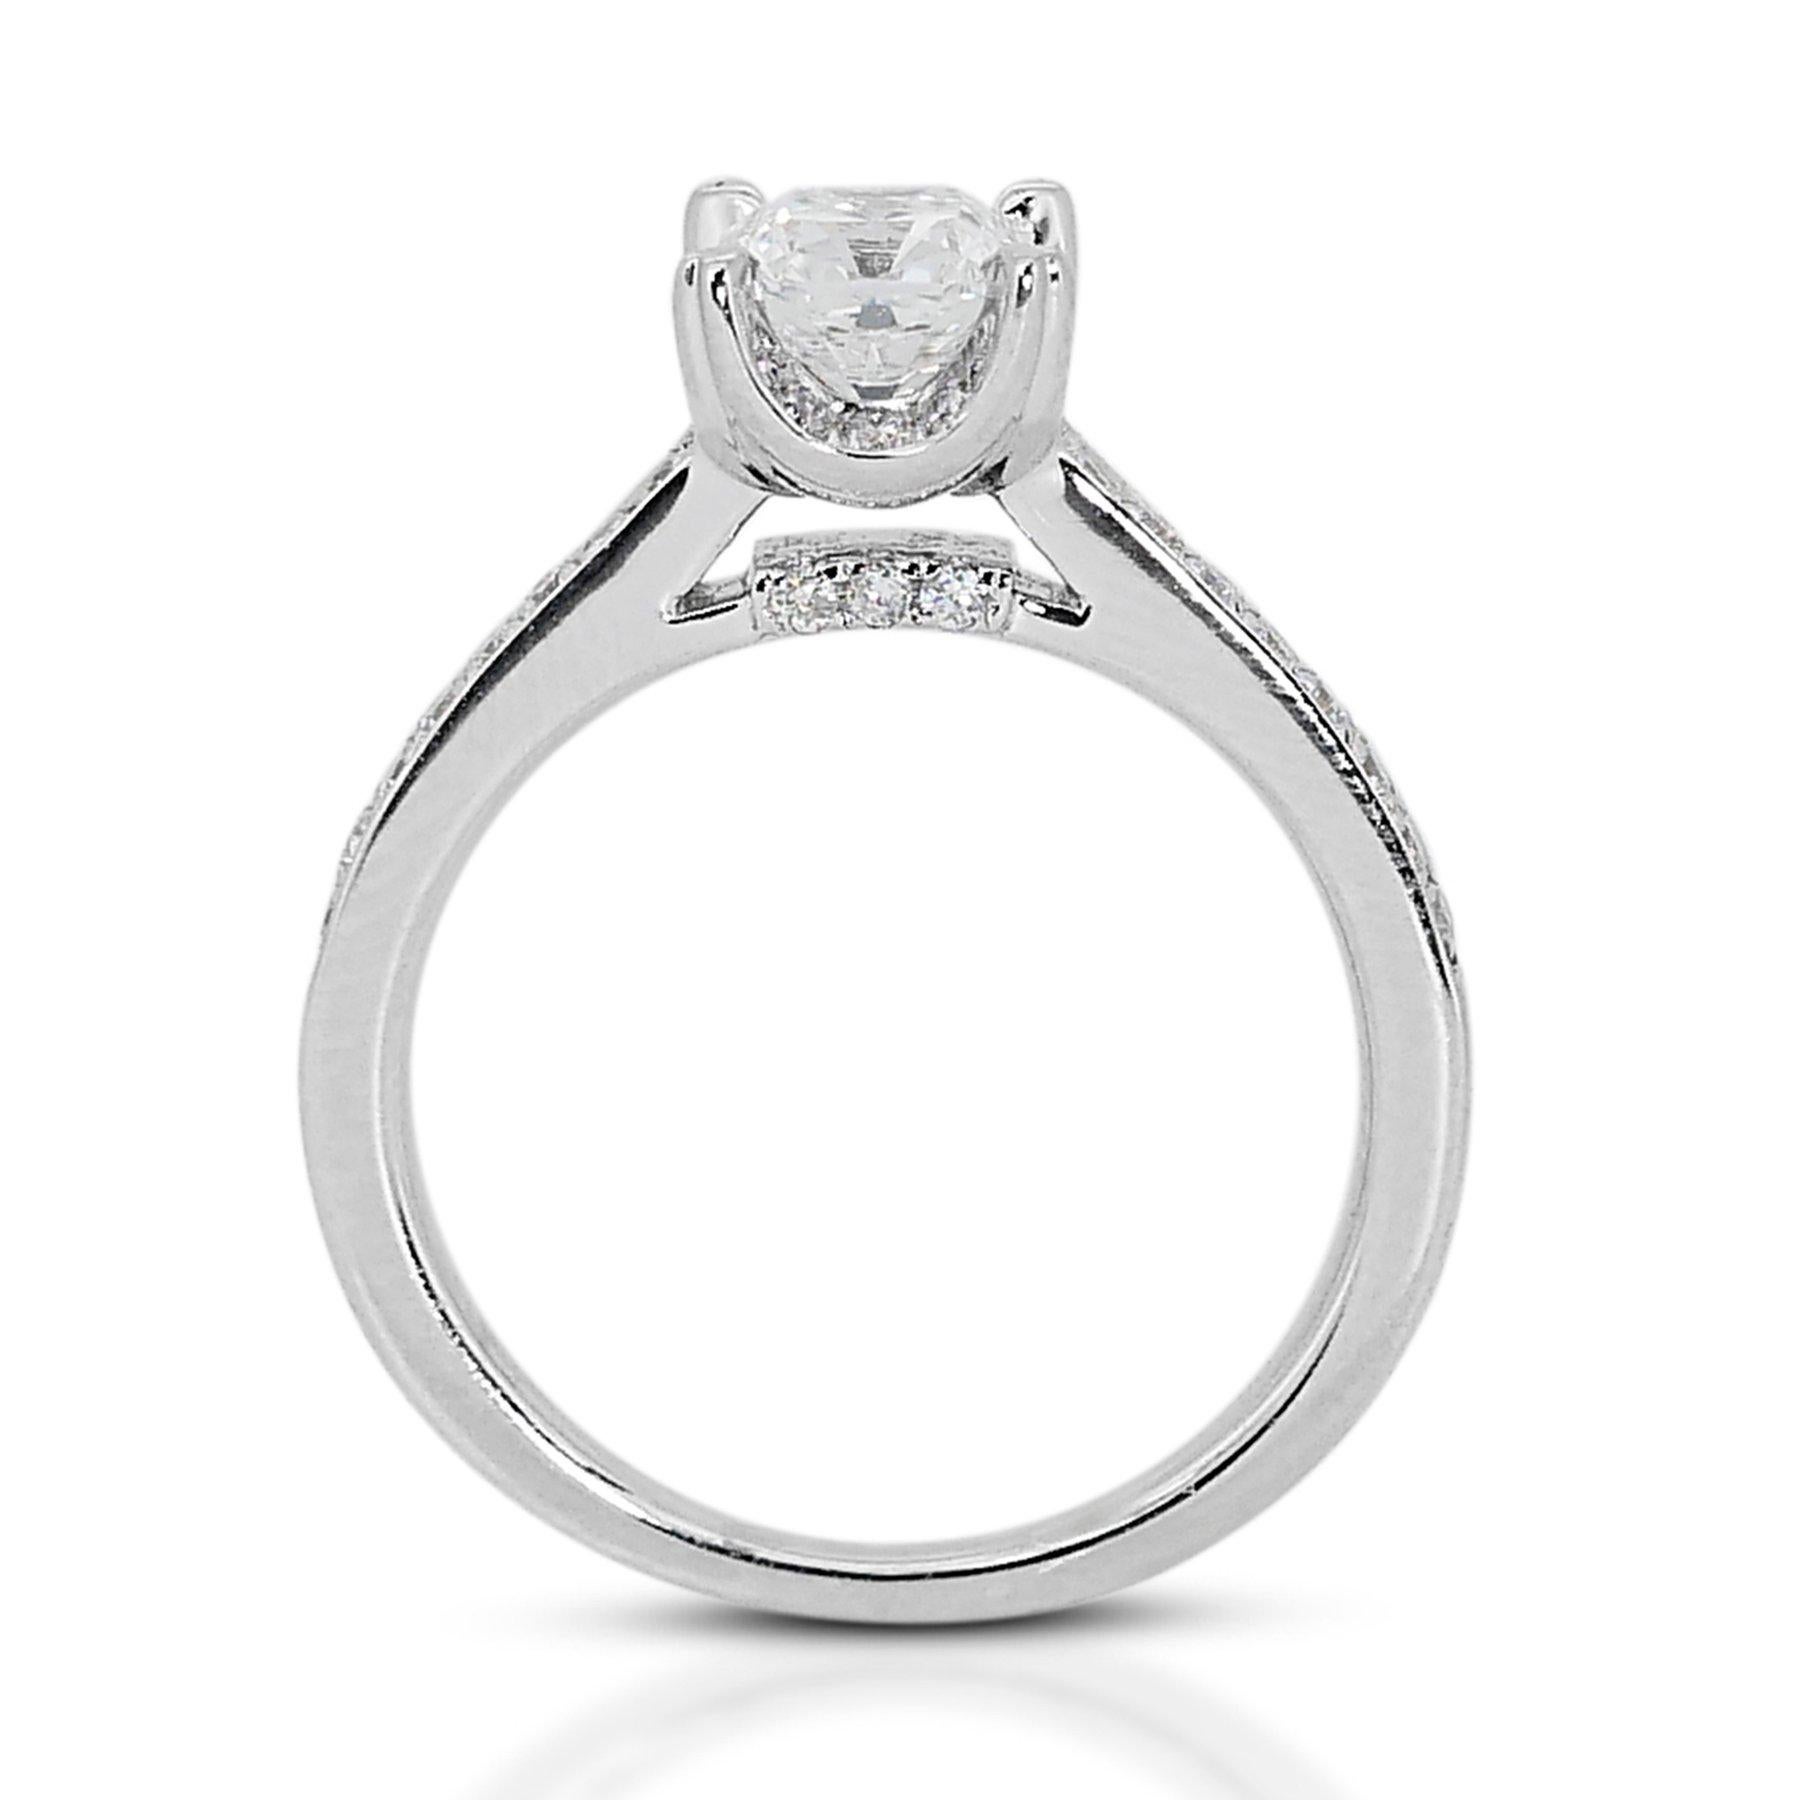 Glamorous 0.87ct Halo Diamond Ring in 18K White Gold For Sale 3